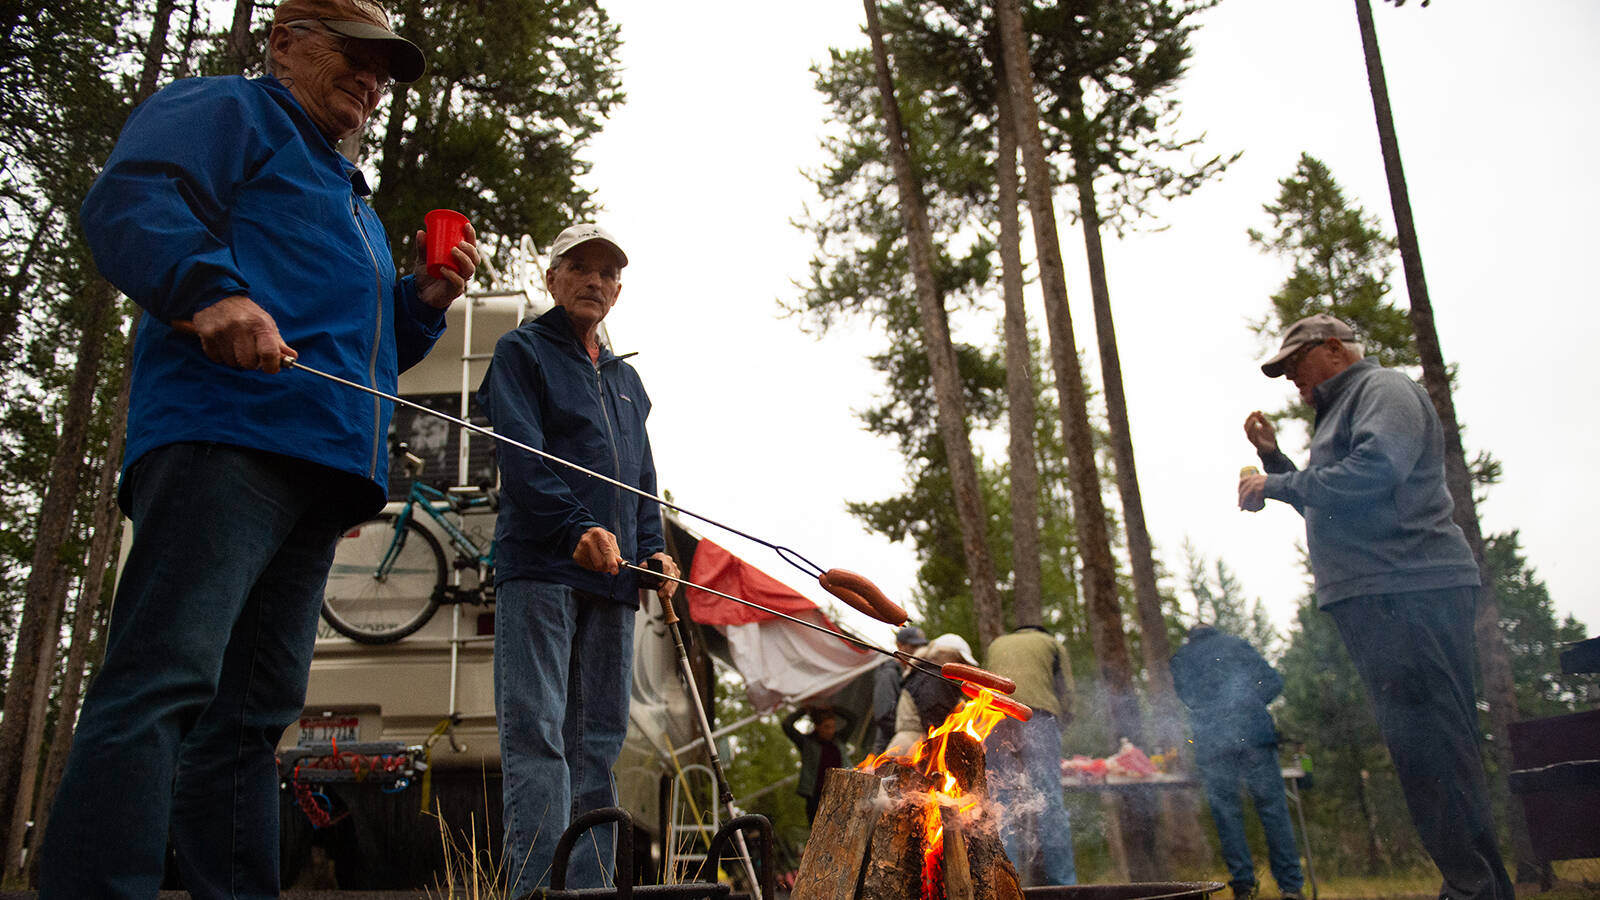 <p>Brothers Cliff Huffman (left) and Dave Huffman roast hot dogs at the Madison Junction campground in August 2022. The brothers worked together as bellmen at Old Faithful Inn in the 1970s.</p>